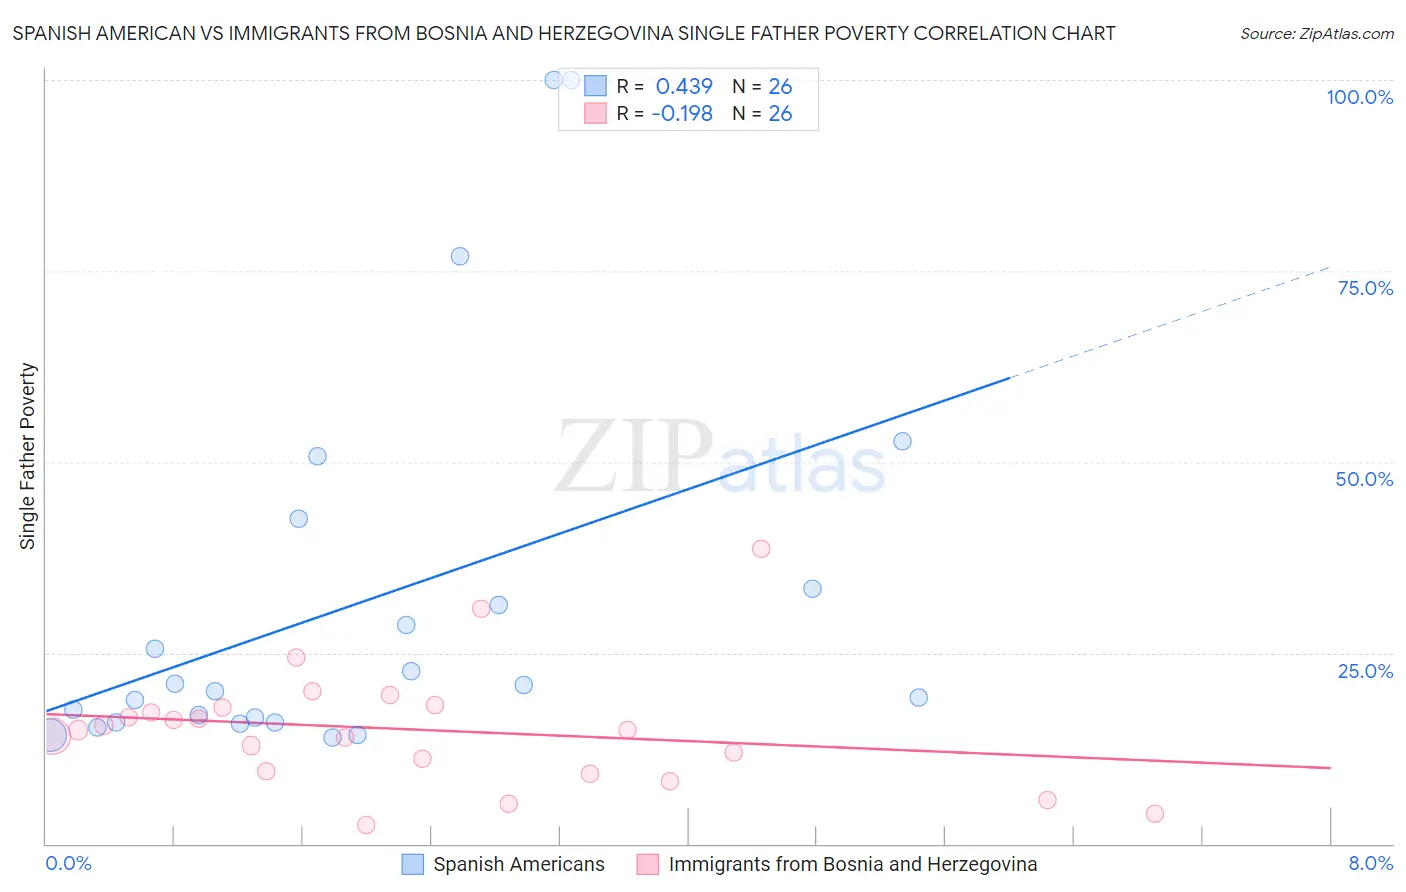 Spanish American vs Immigrants from Bosnia and Herzegovina Single Father Poverty